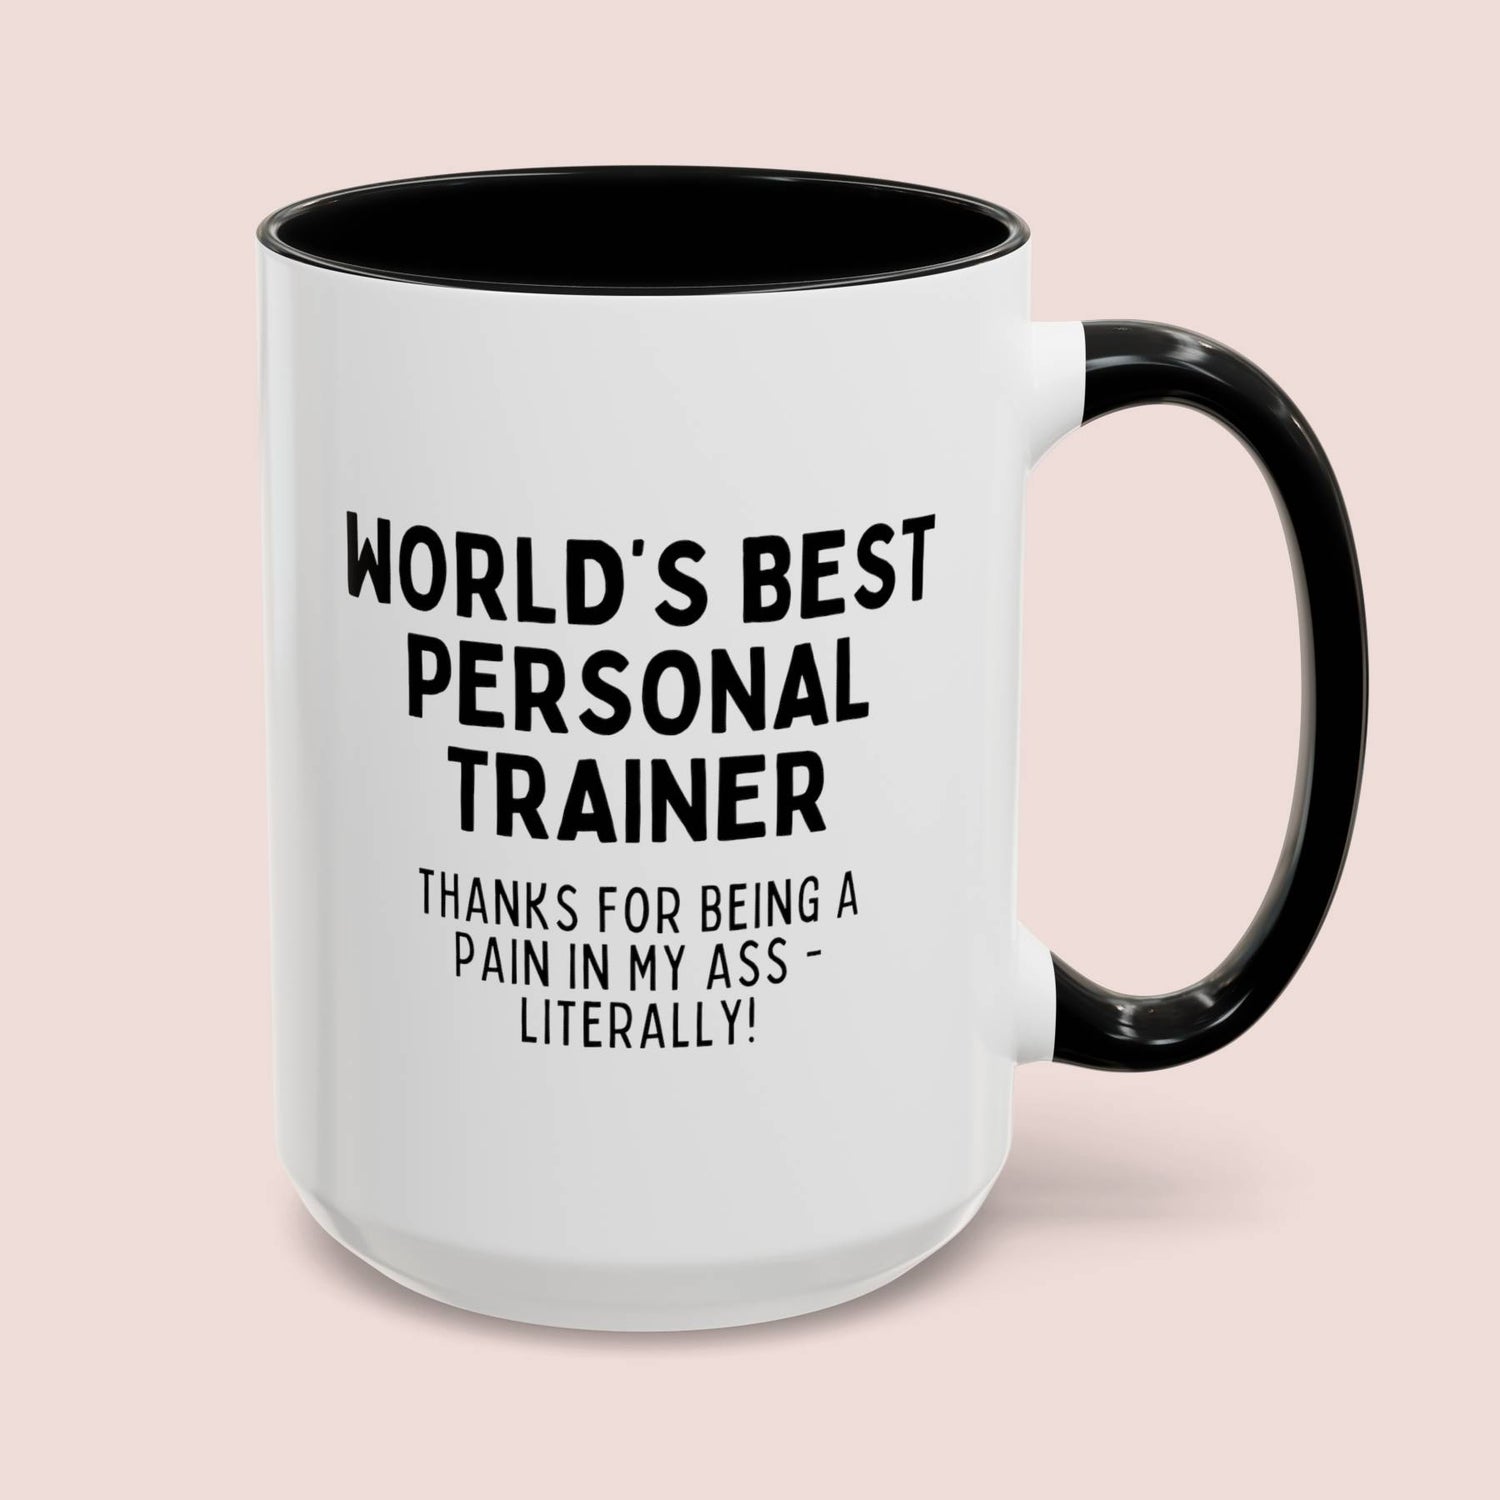 World's Best Personal Trainer Thanks For Being A Pain In My Ass - Literally 15oz white with black accent funny large coffee mug gift for fitness coach gym waveywares wavey wares wavywares wavy wares cover